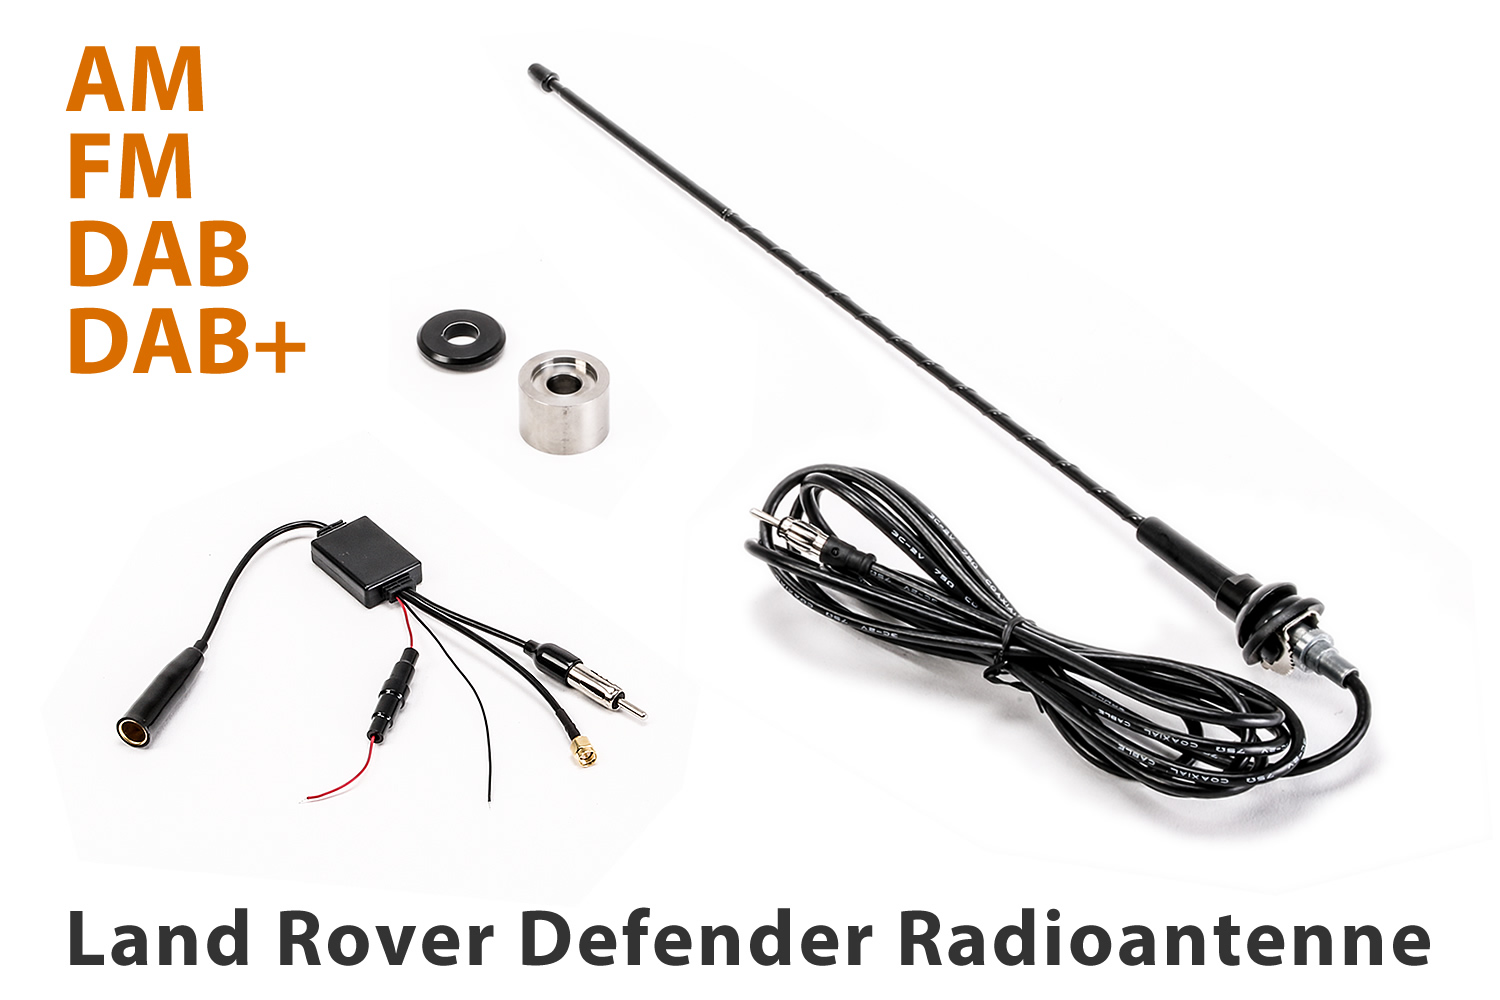 ▷ AM/FM/DAB/DAB+ Antenna for Land Rover Defender - available here